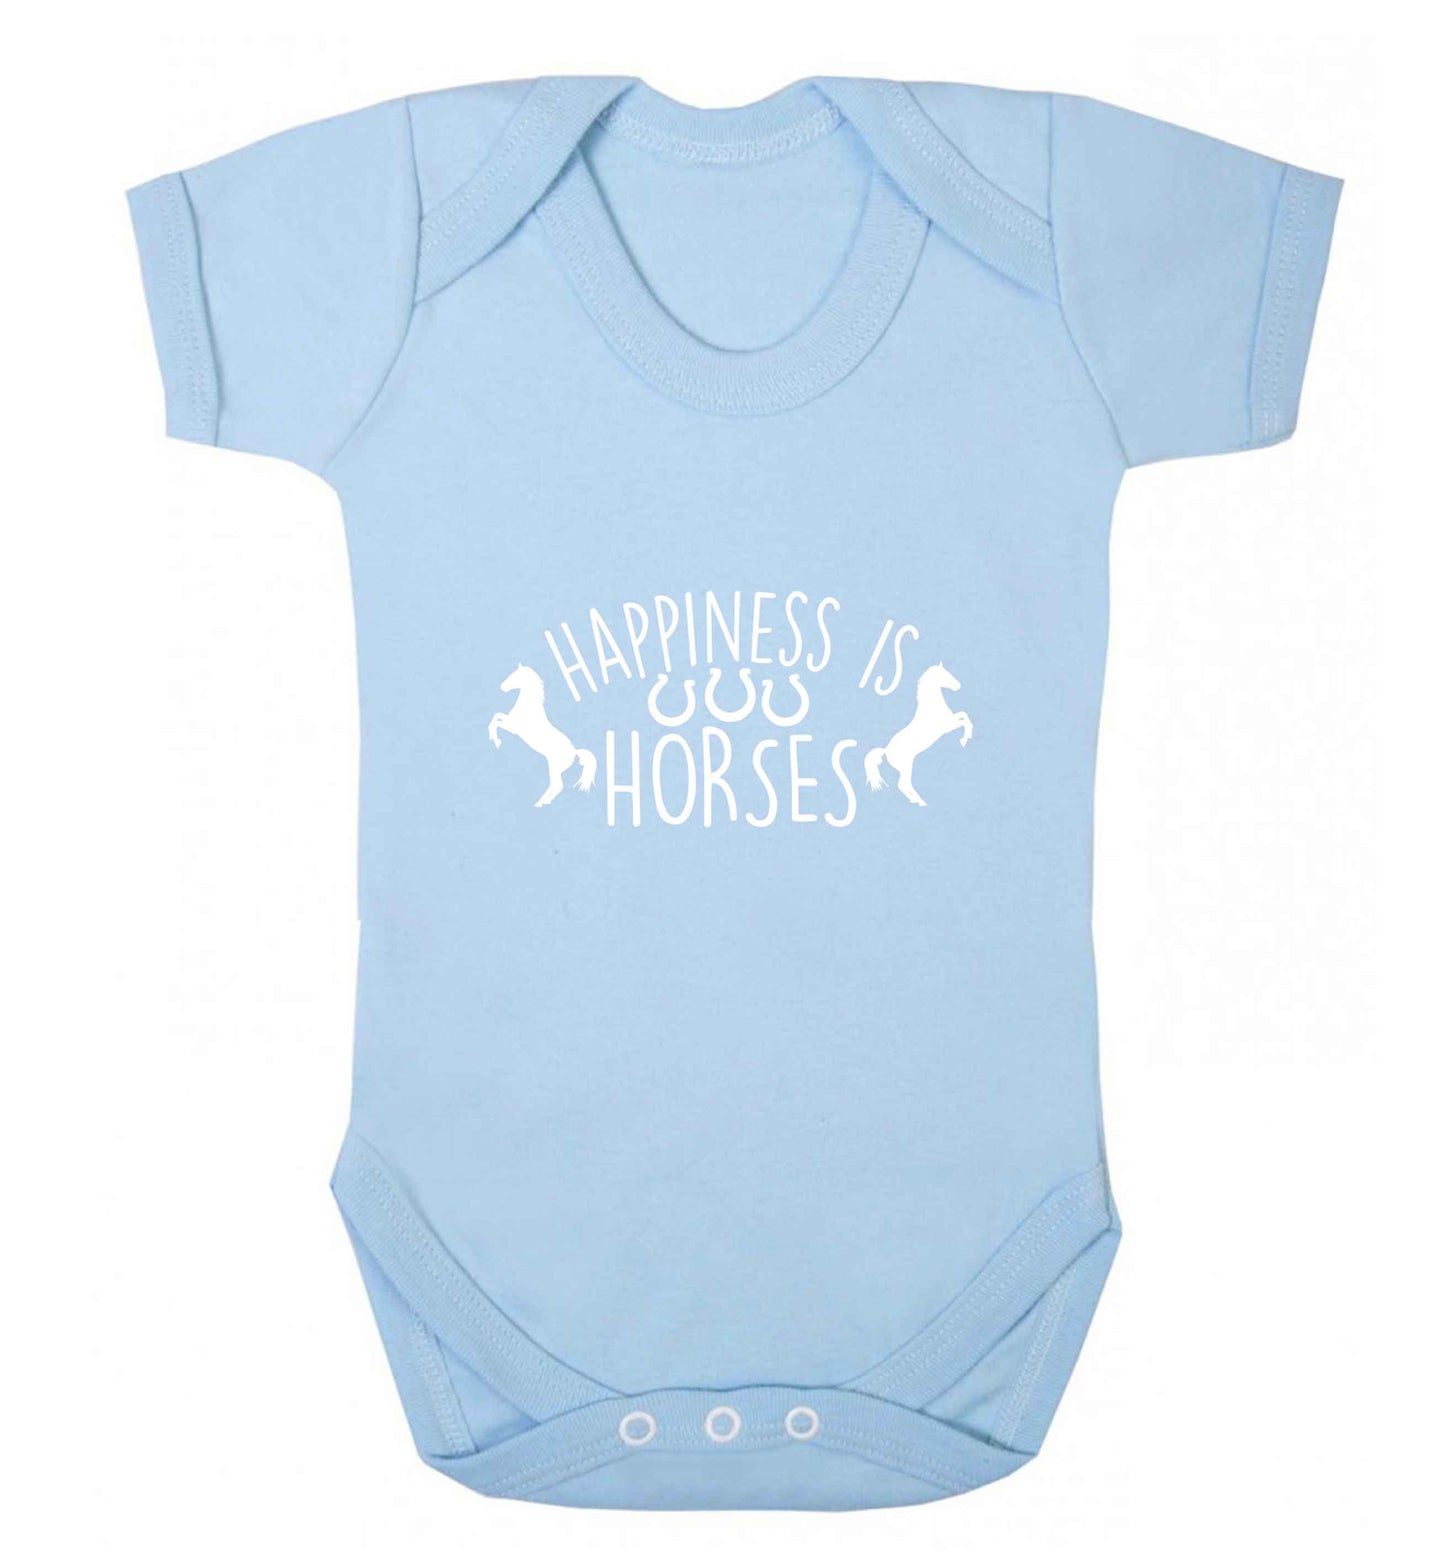 Happiness is horses baby vest pale blue 18-24 months